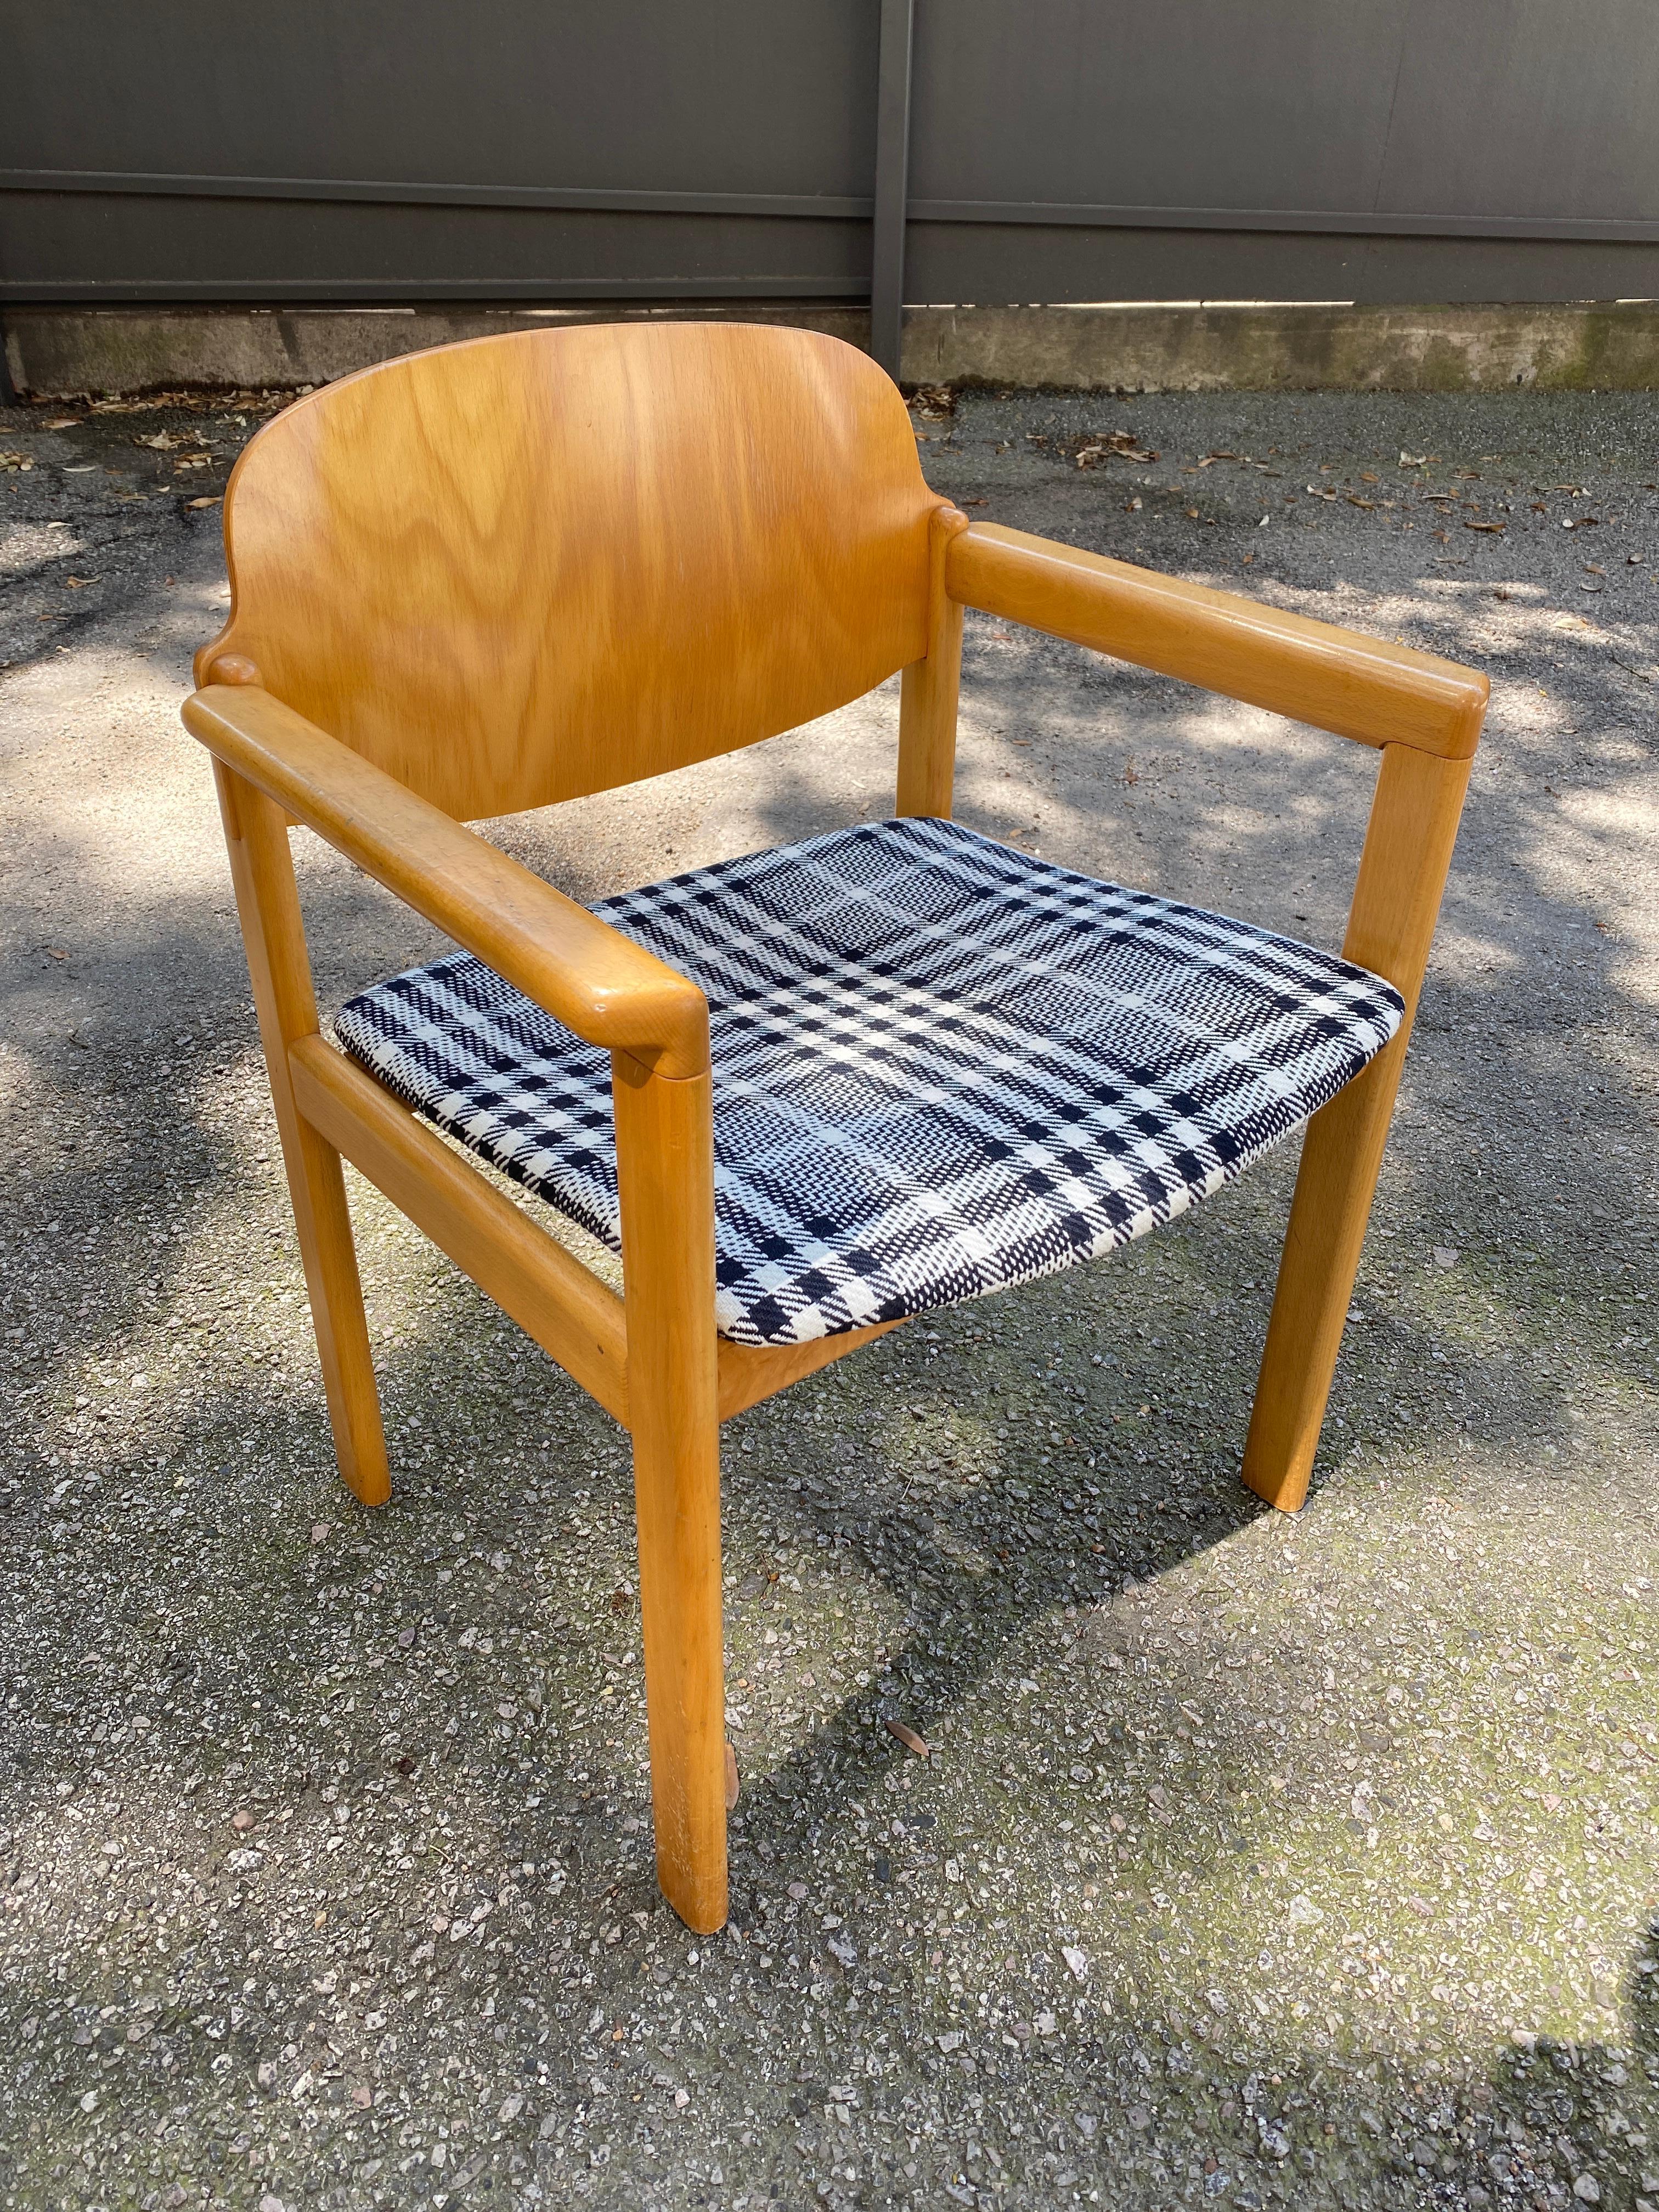 Set of 6 Mid-Century Modern armed dining chairs or office chairs. Scandinavian styling in solid birch frame with bentwood back and custom upholstered seat in black and white plaid. Very comfortable and sturdy, Netherlands, 1970s

New upholstery